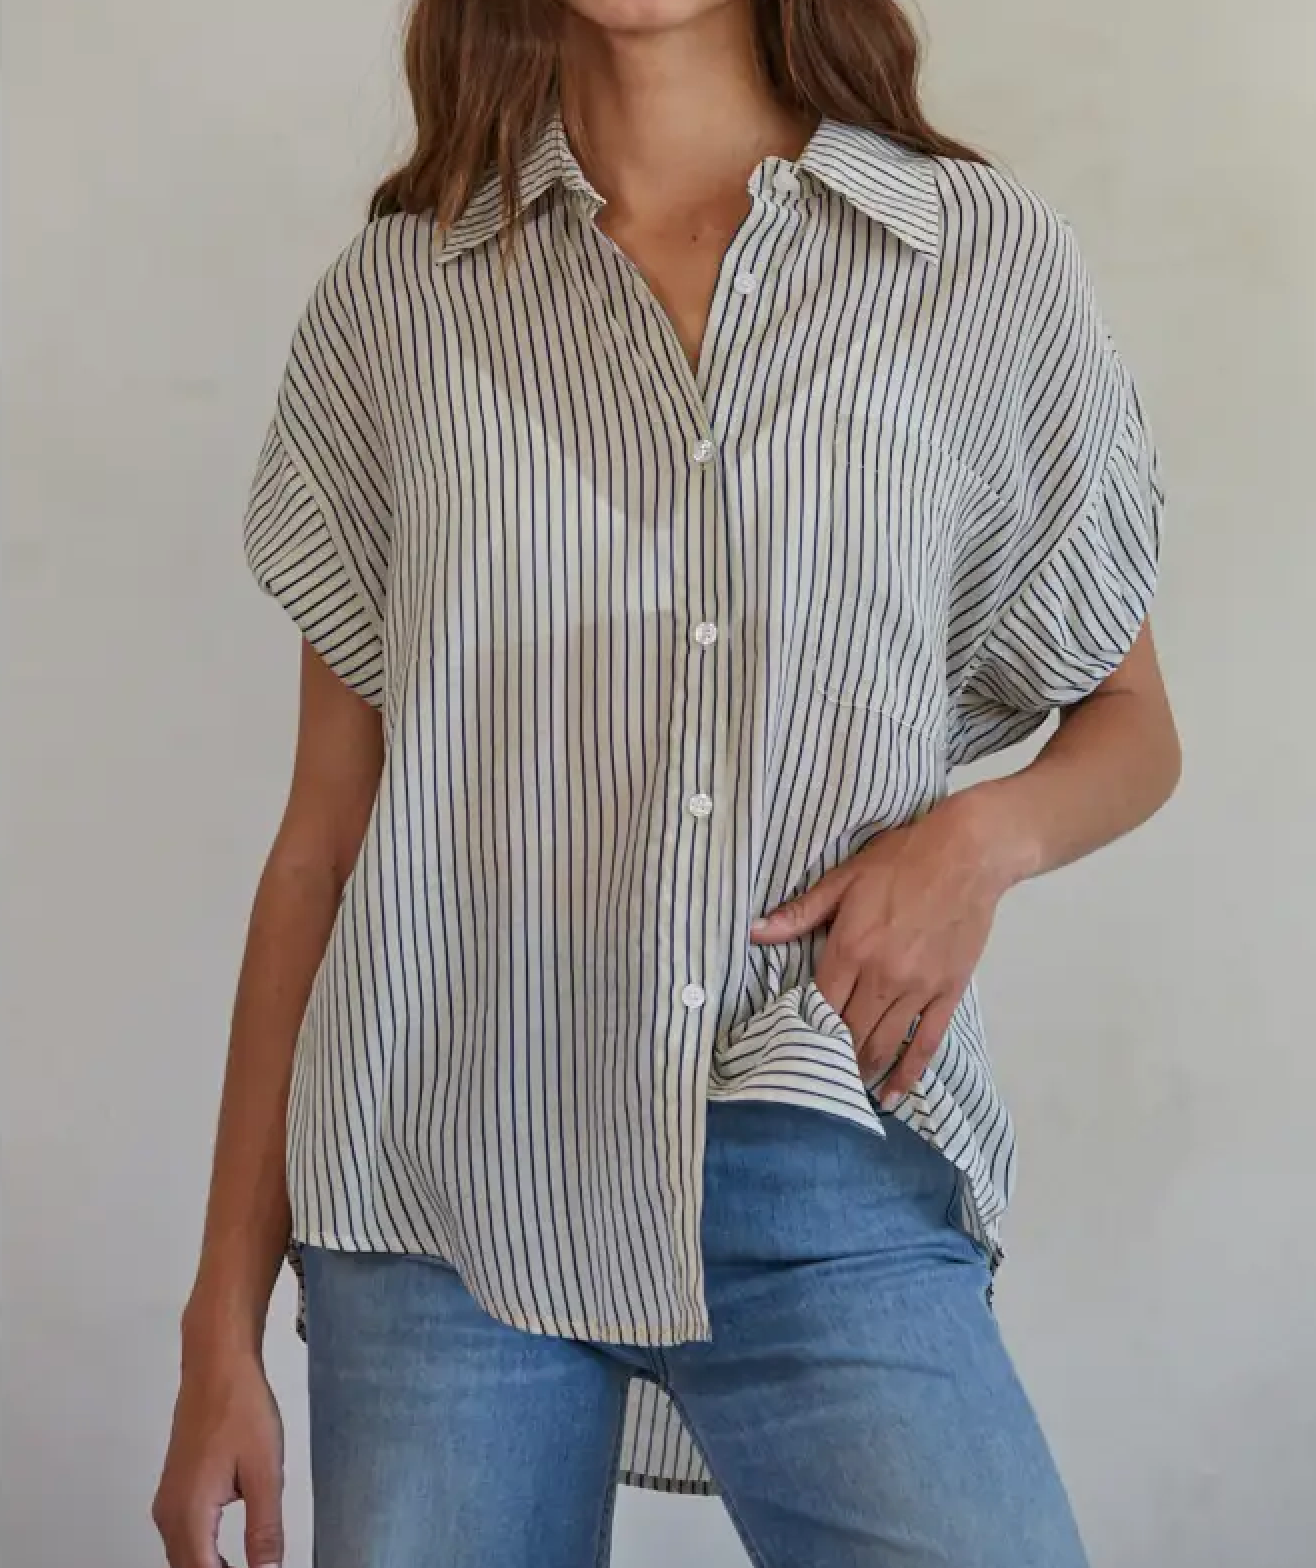 Striped Womens Button Down Short Sleeve Top